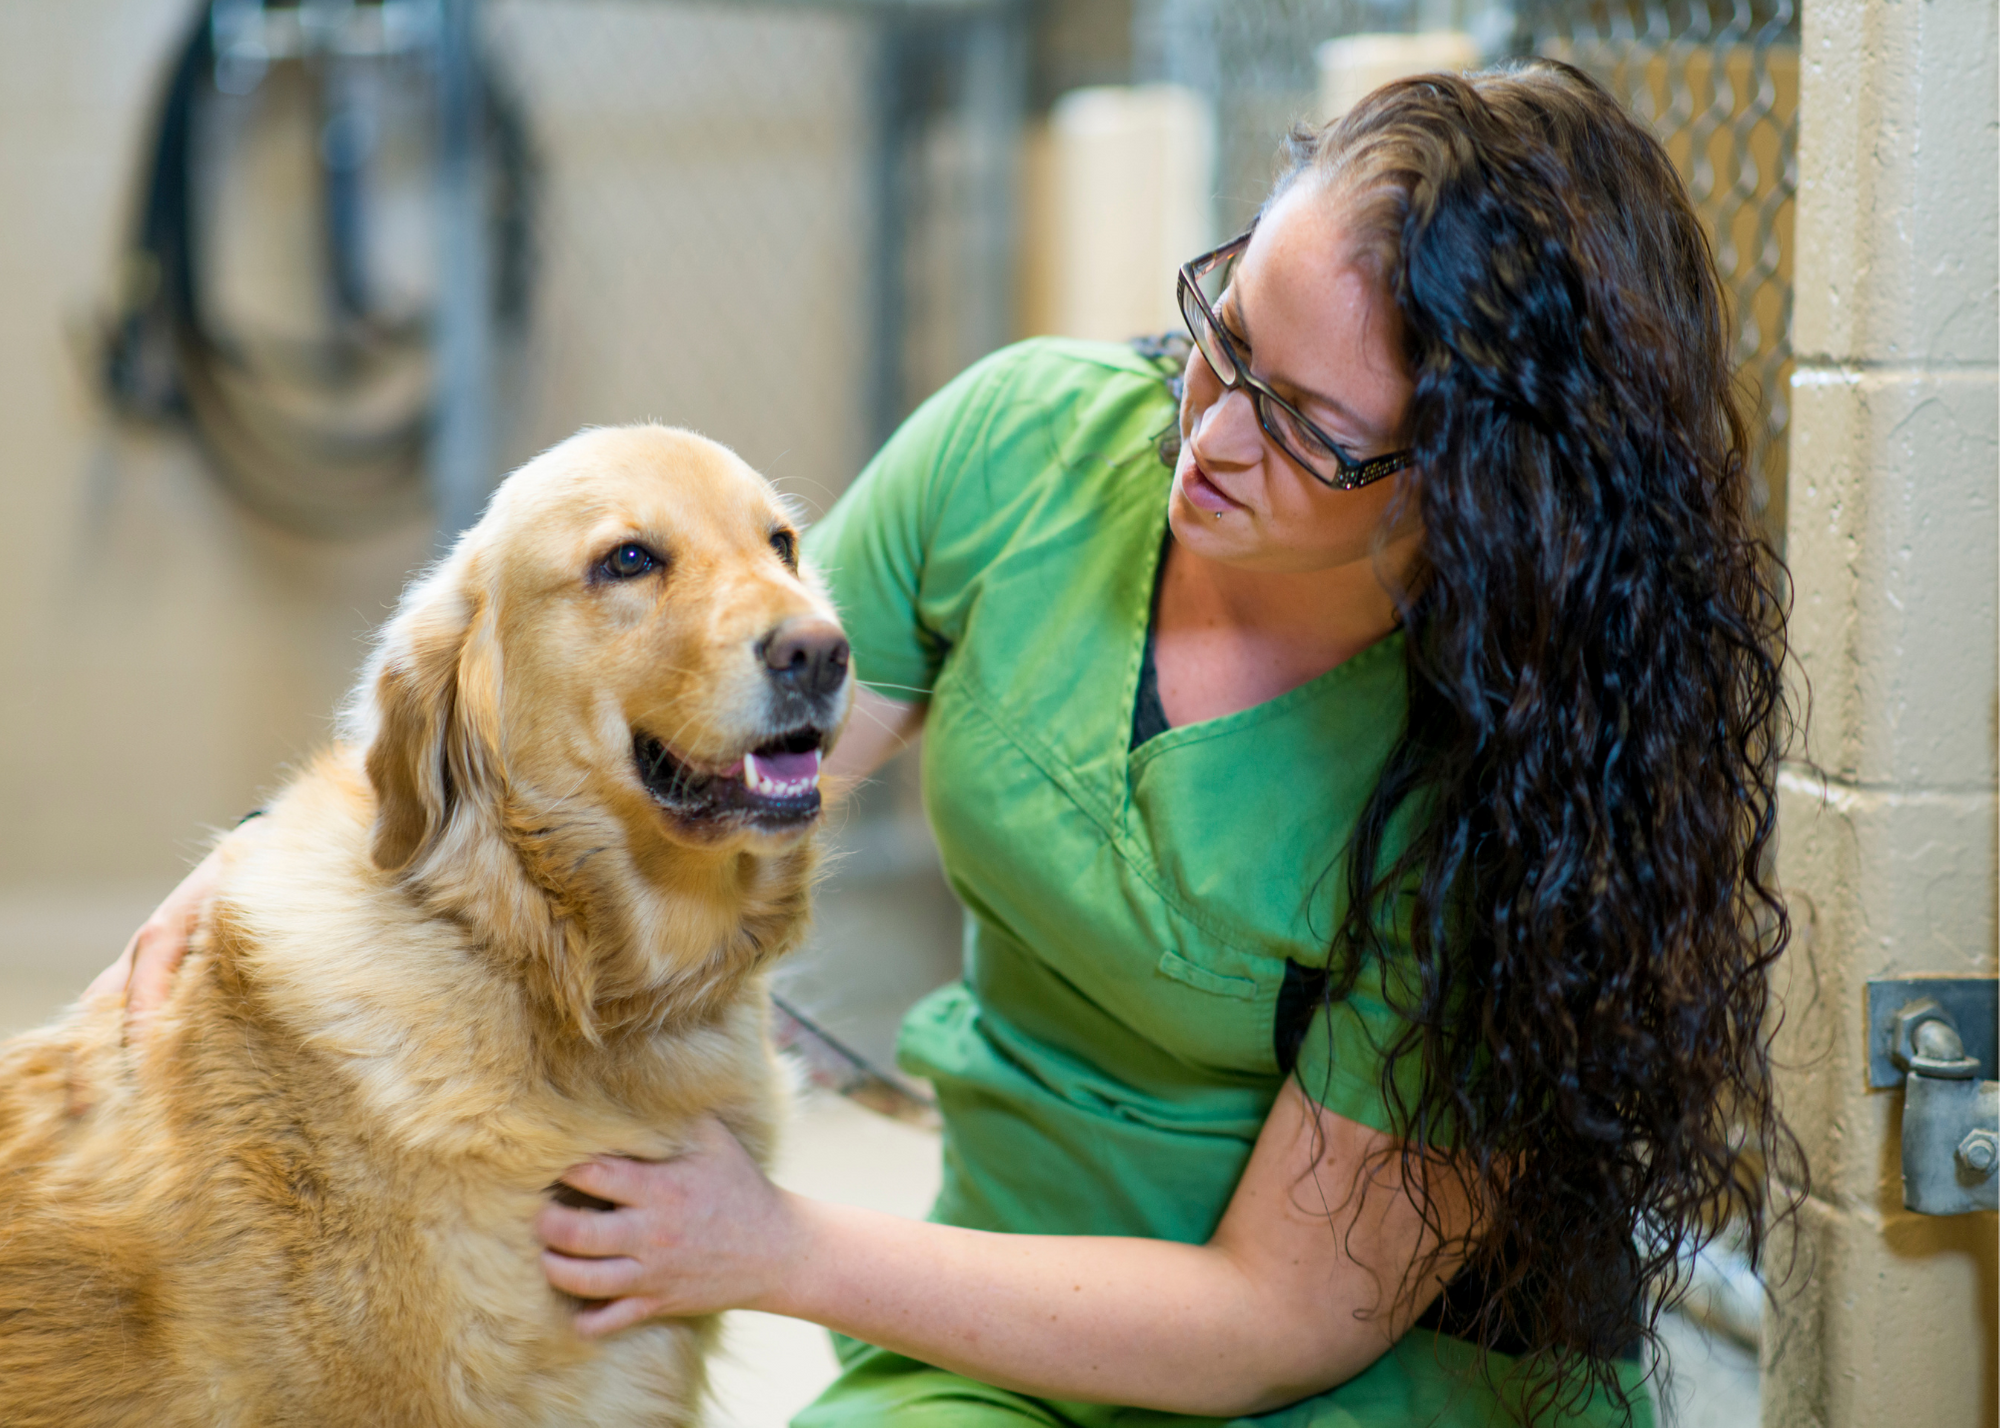 Volunteering with Animals: 10 ways to spend your service hours with four-legged friends